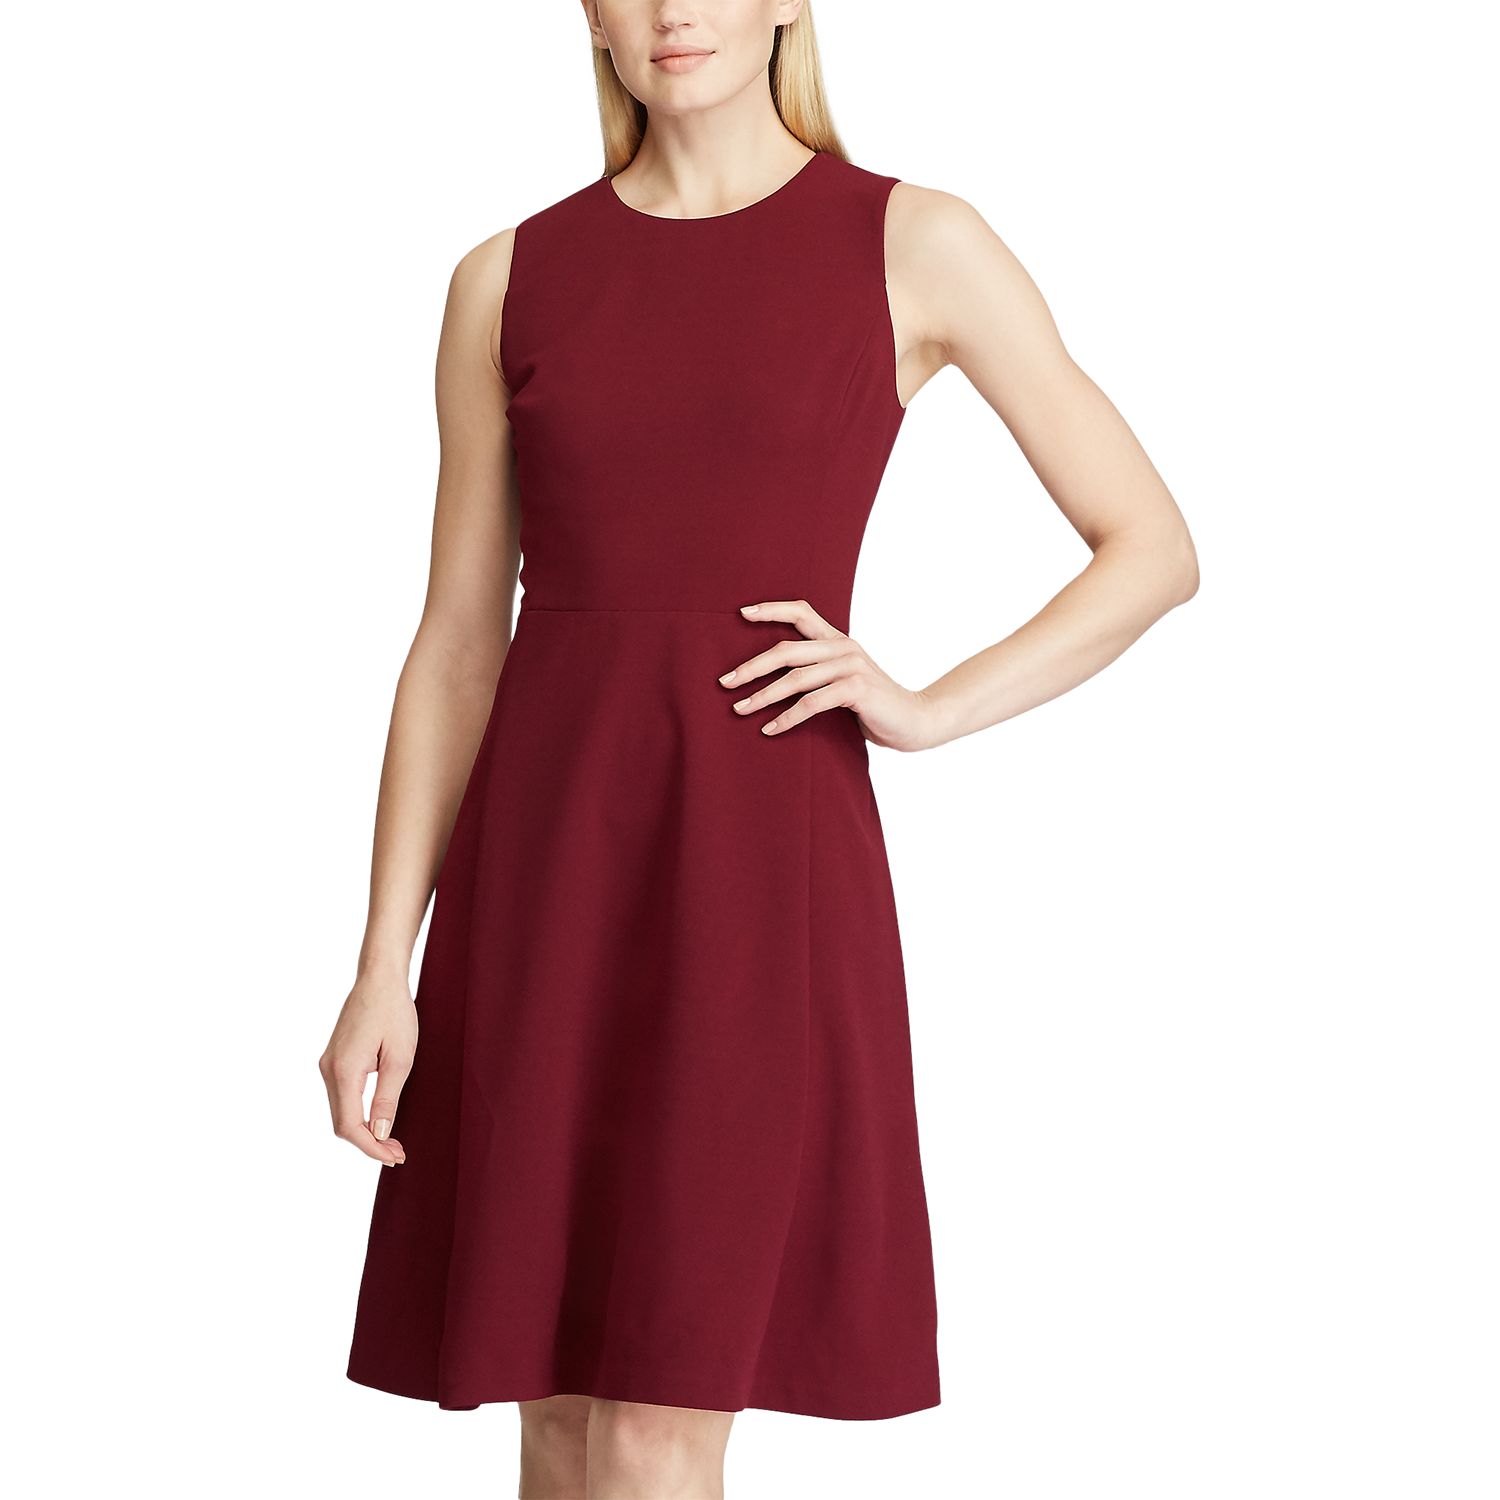 kohl's fit and flare dress